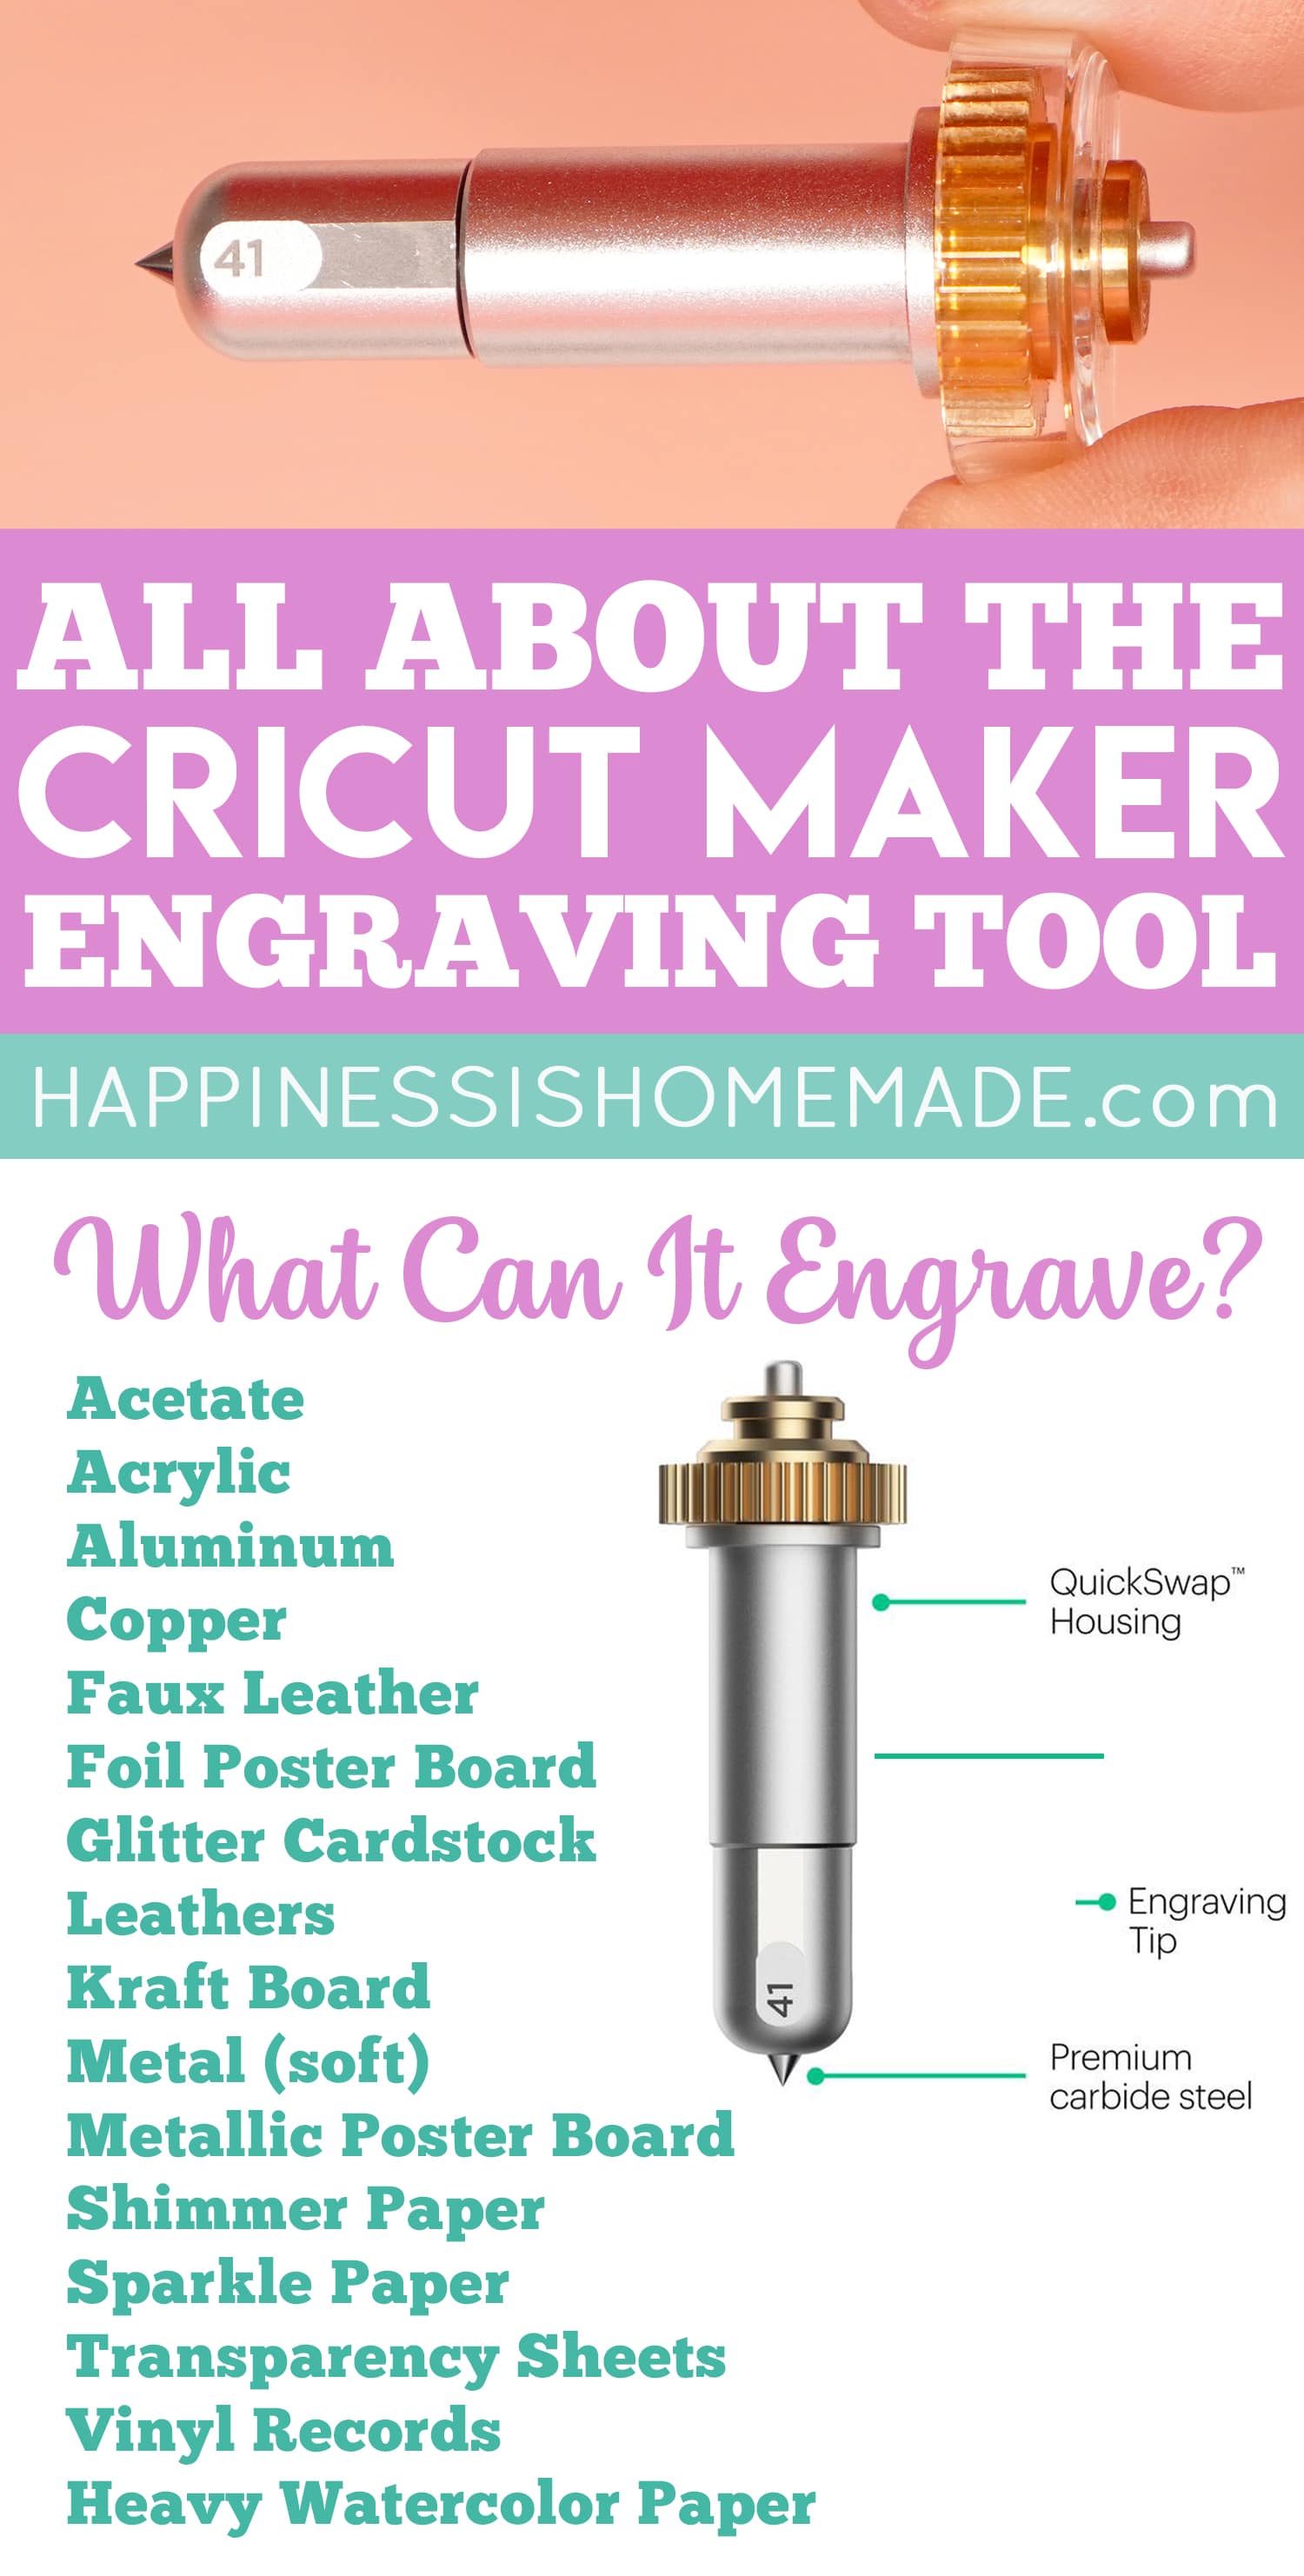 Cricut Maker Engraving Tool: What Materials Can We Engrave